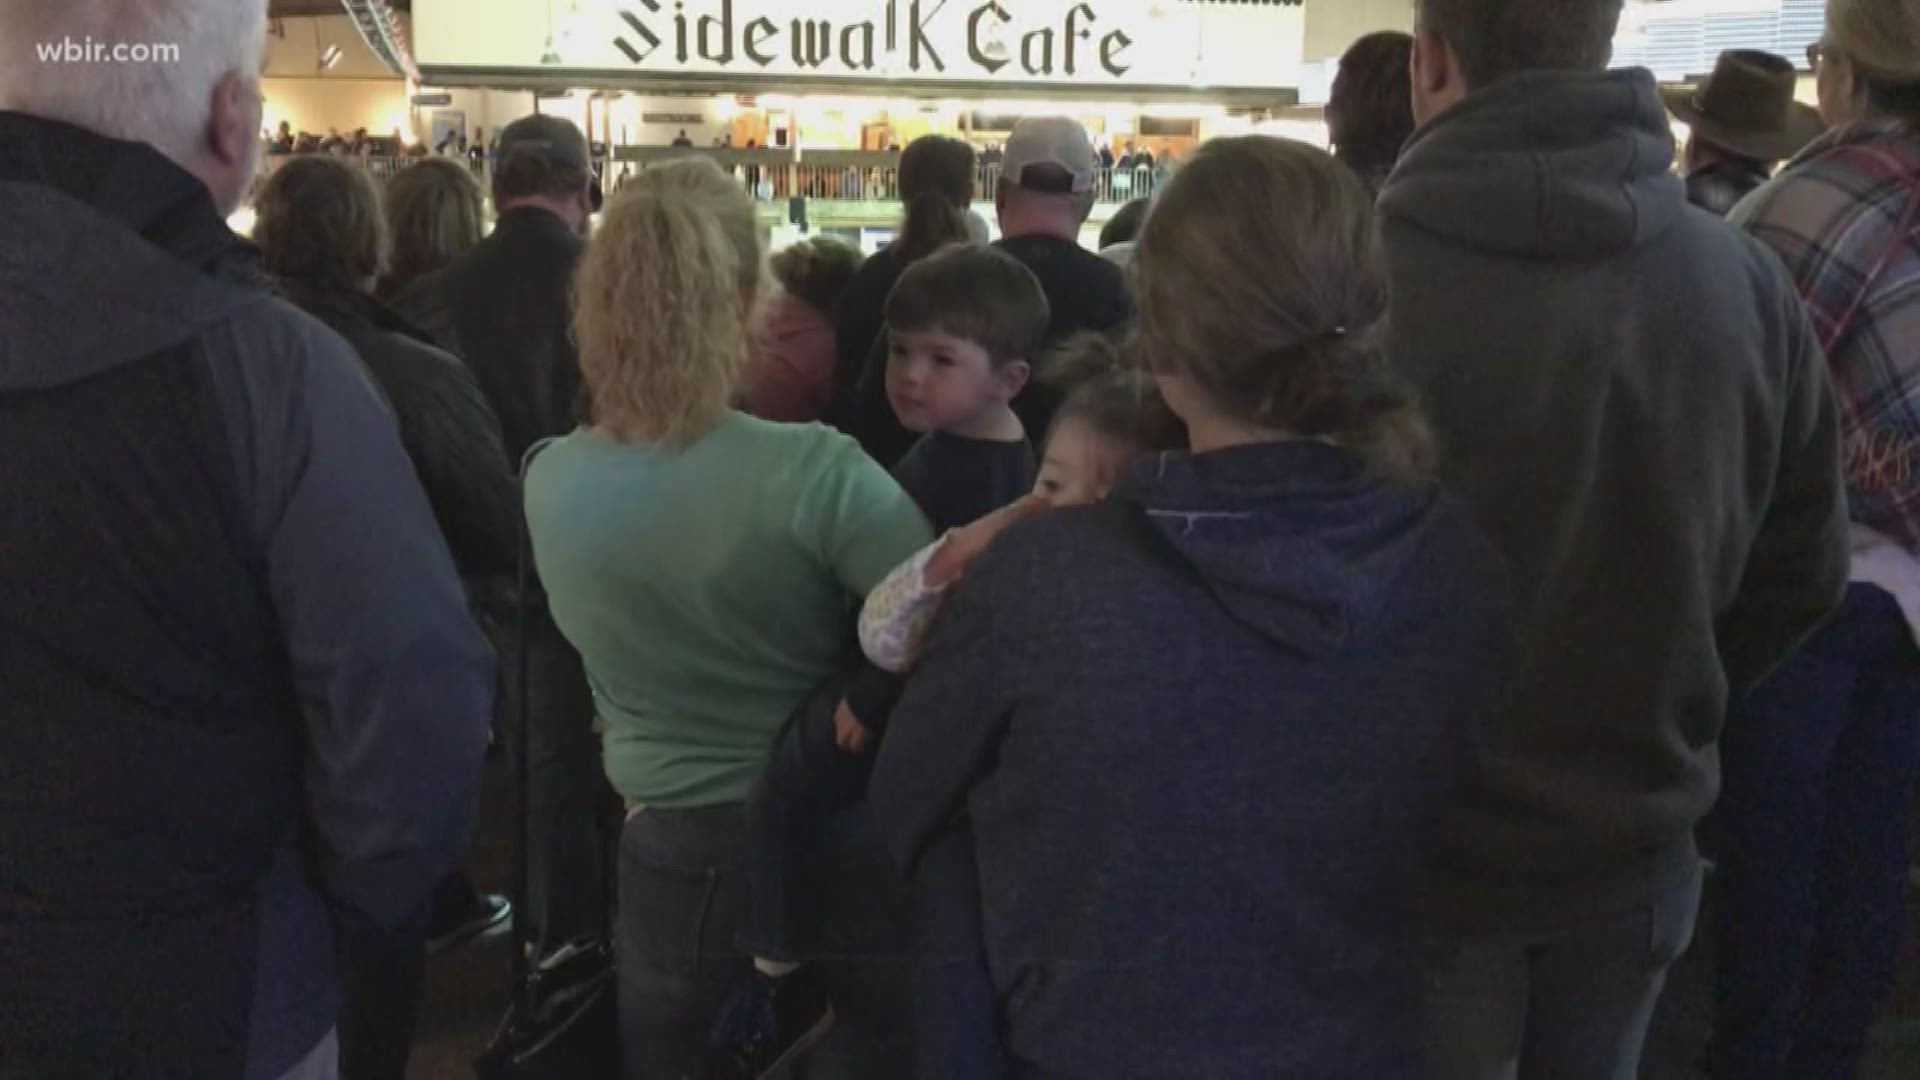 Hundreds of people packed the inside of Ober Gatlinburg after sunrise service was rained out.